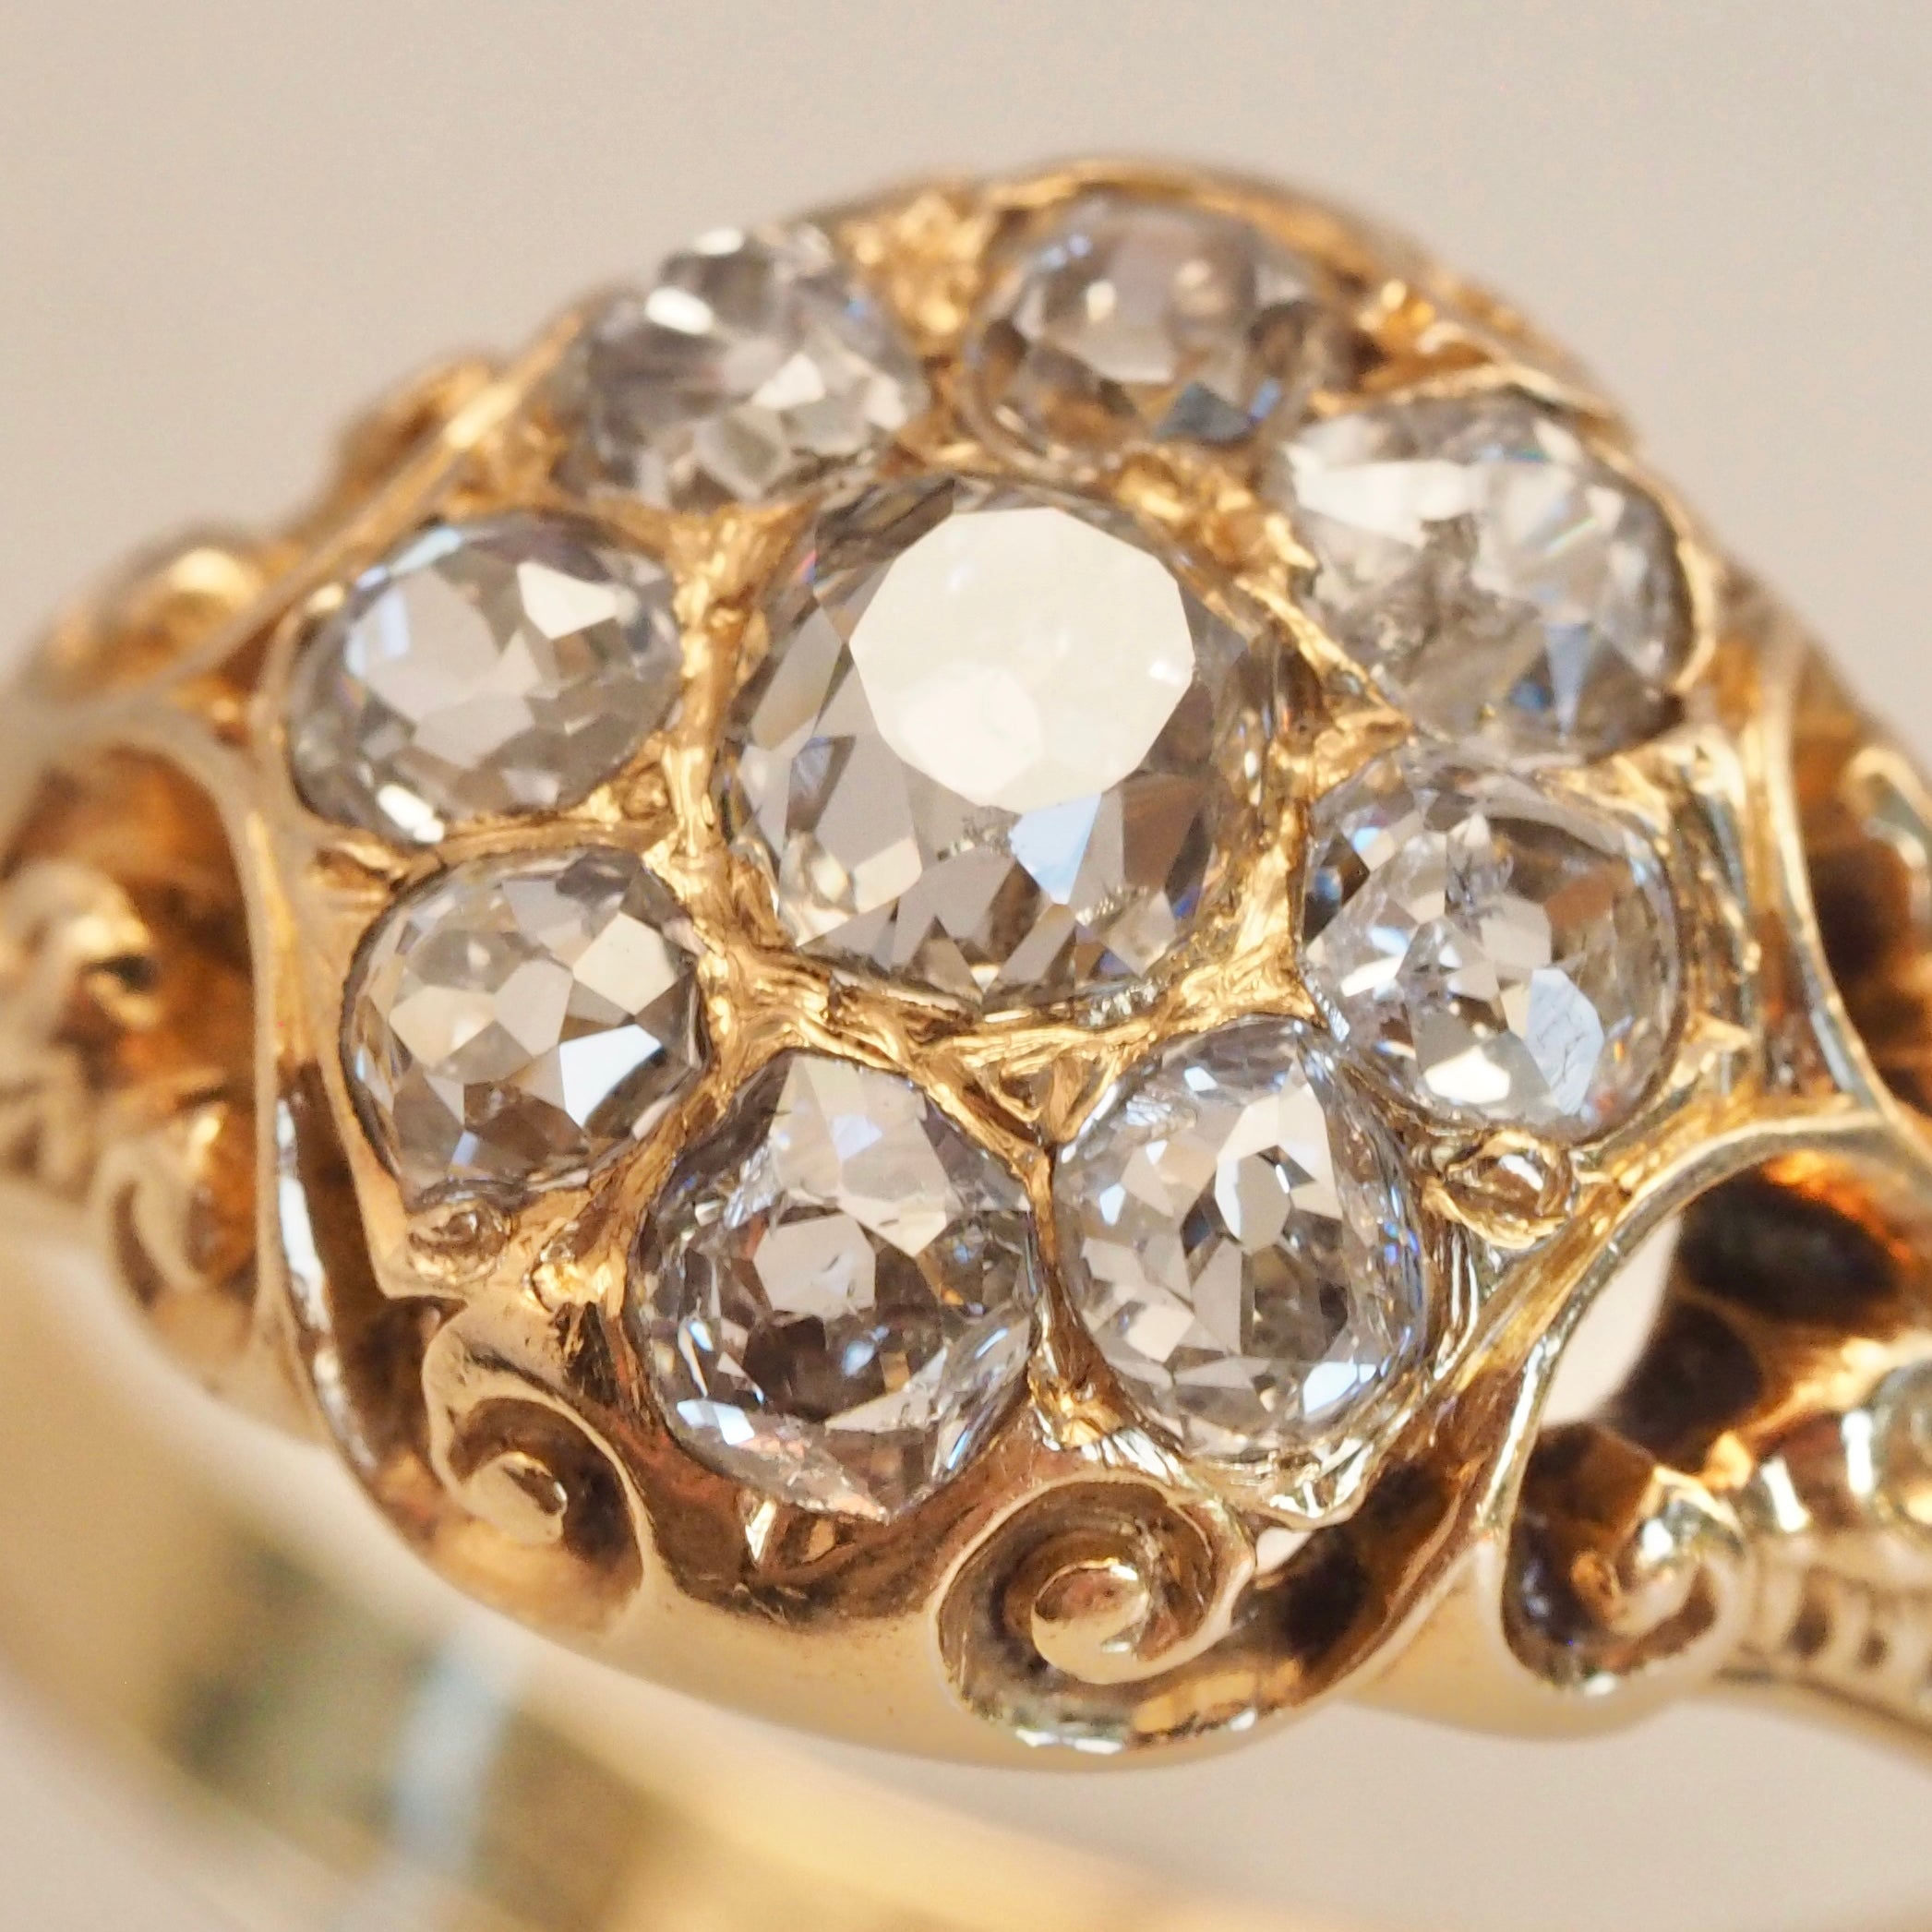 Antique Victorian 18k Gold Old Mine Cut Diamond Cluster Ring